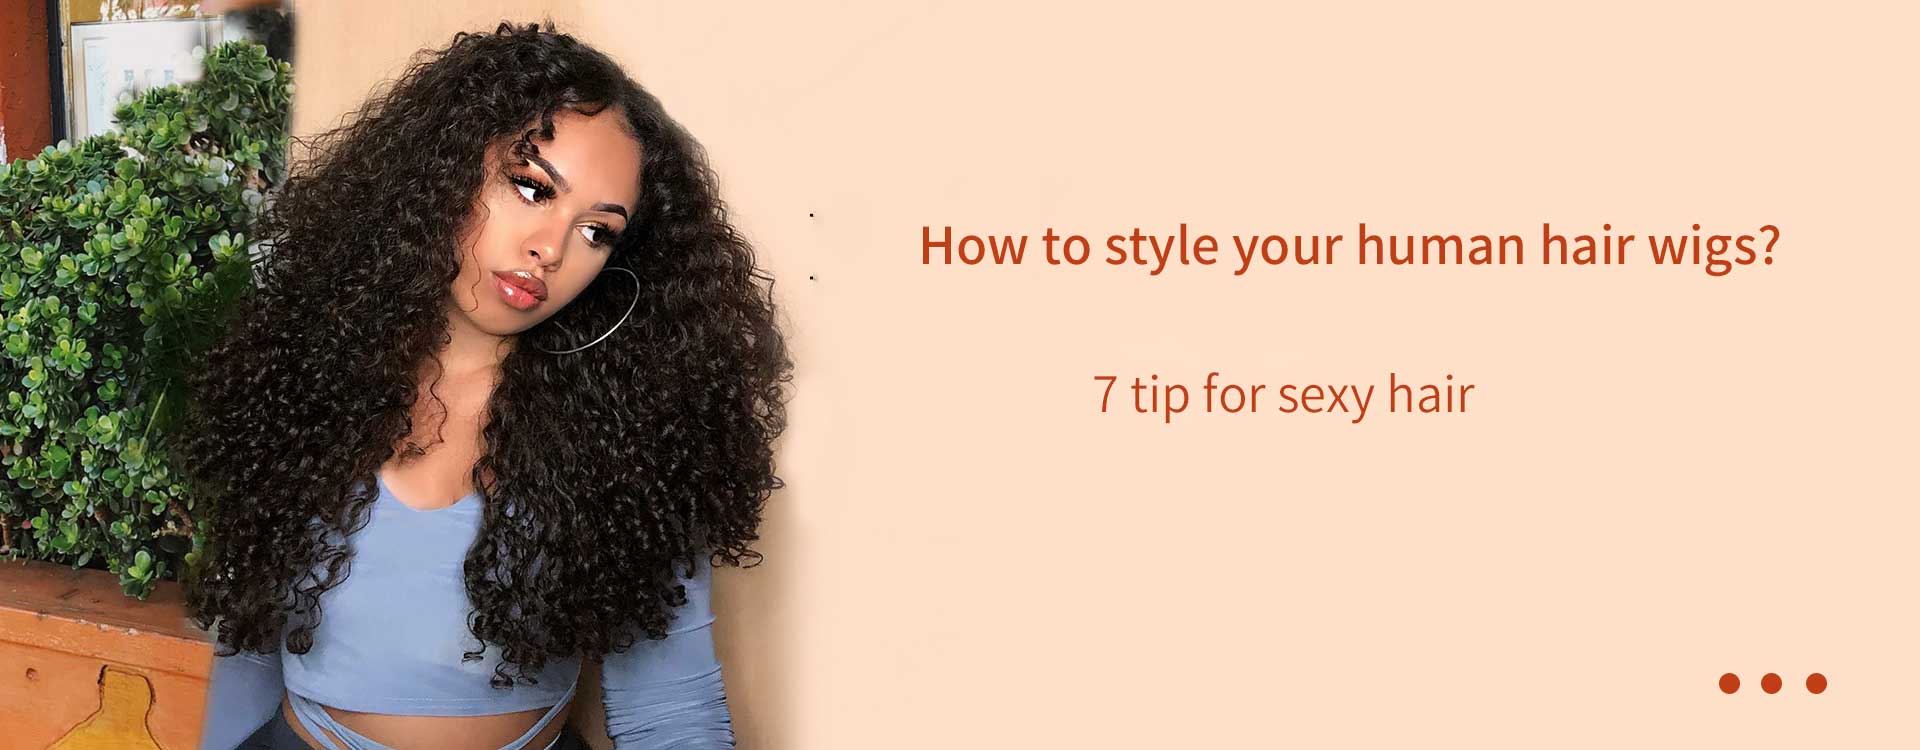 7 tips for sexy hair